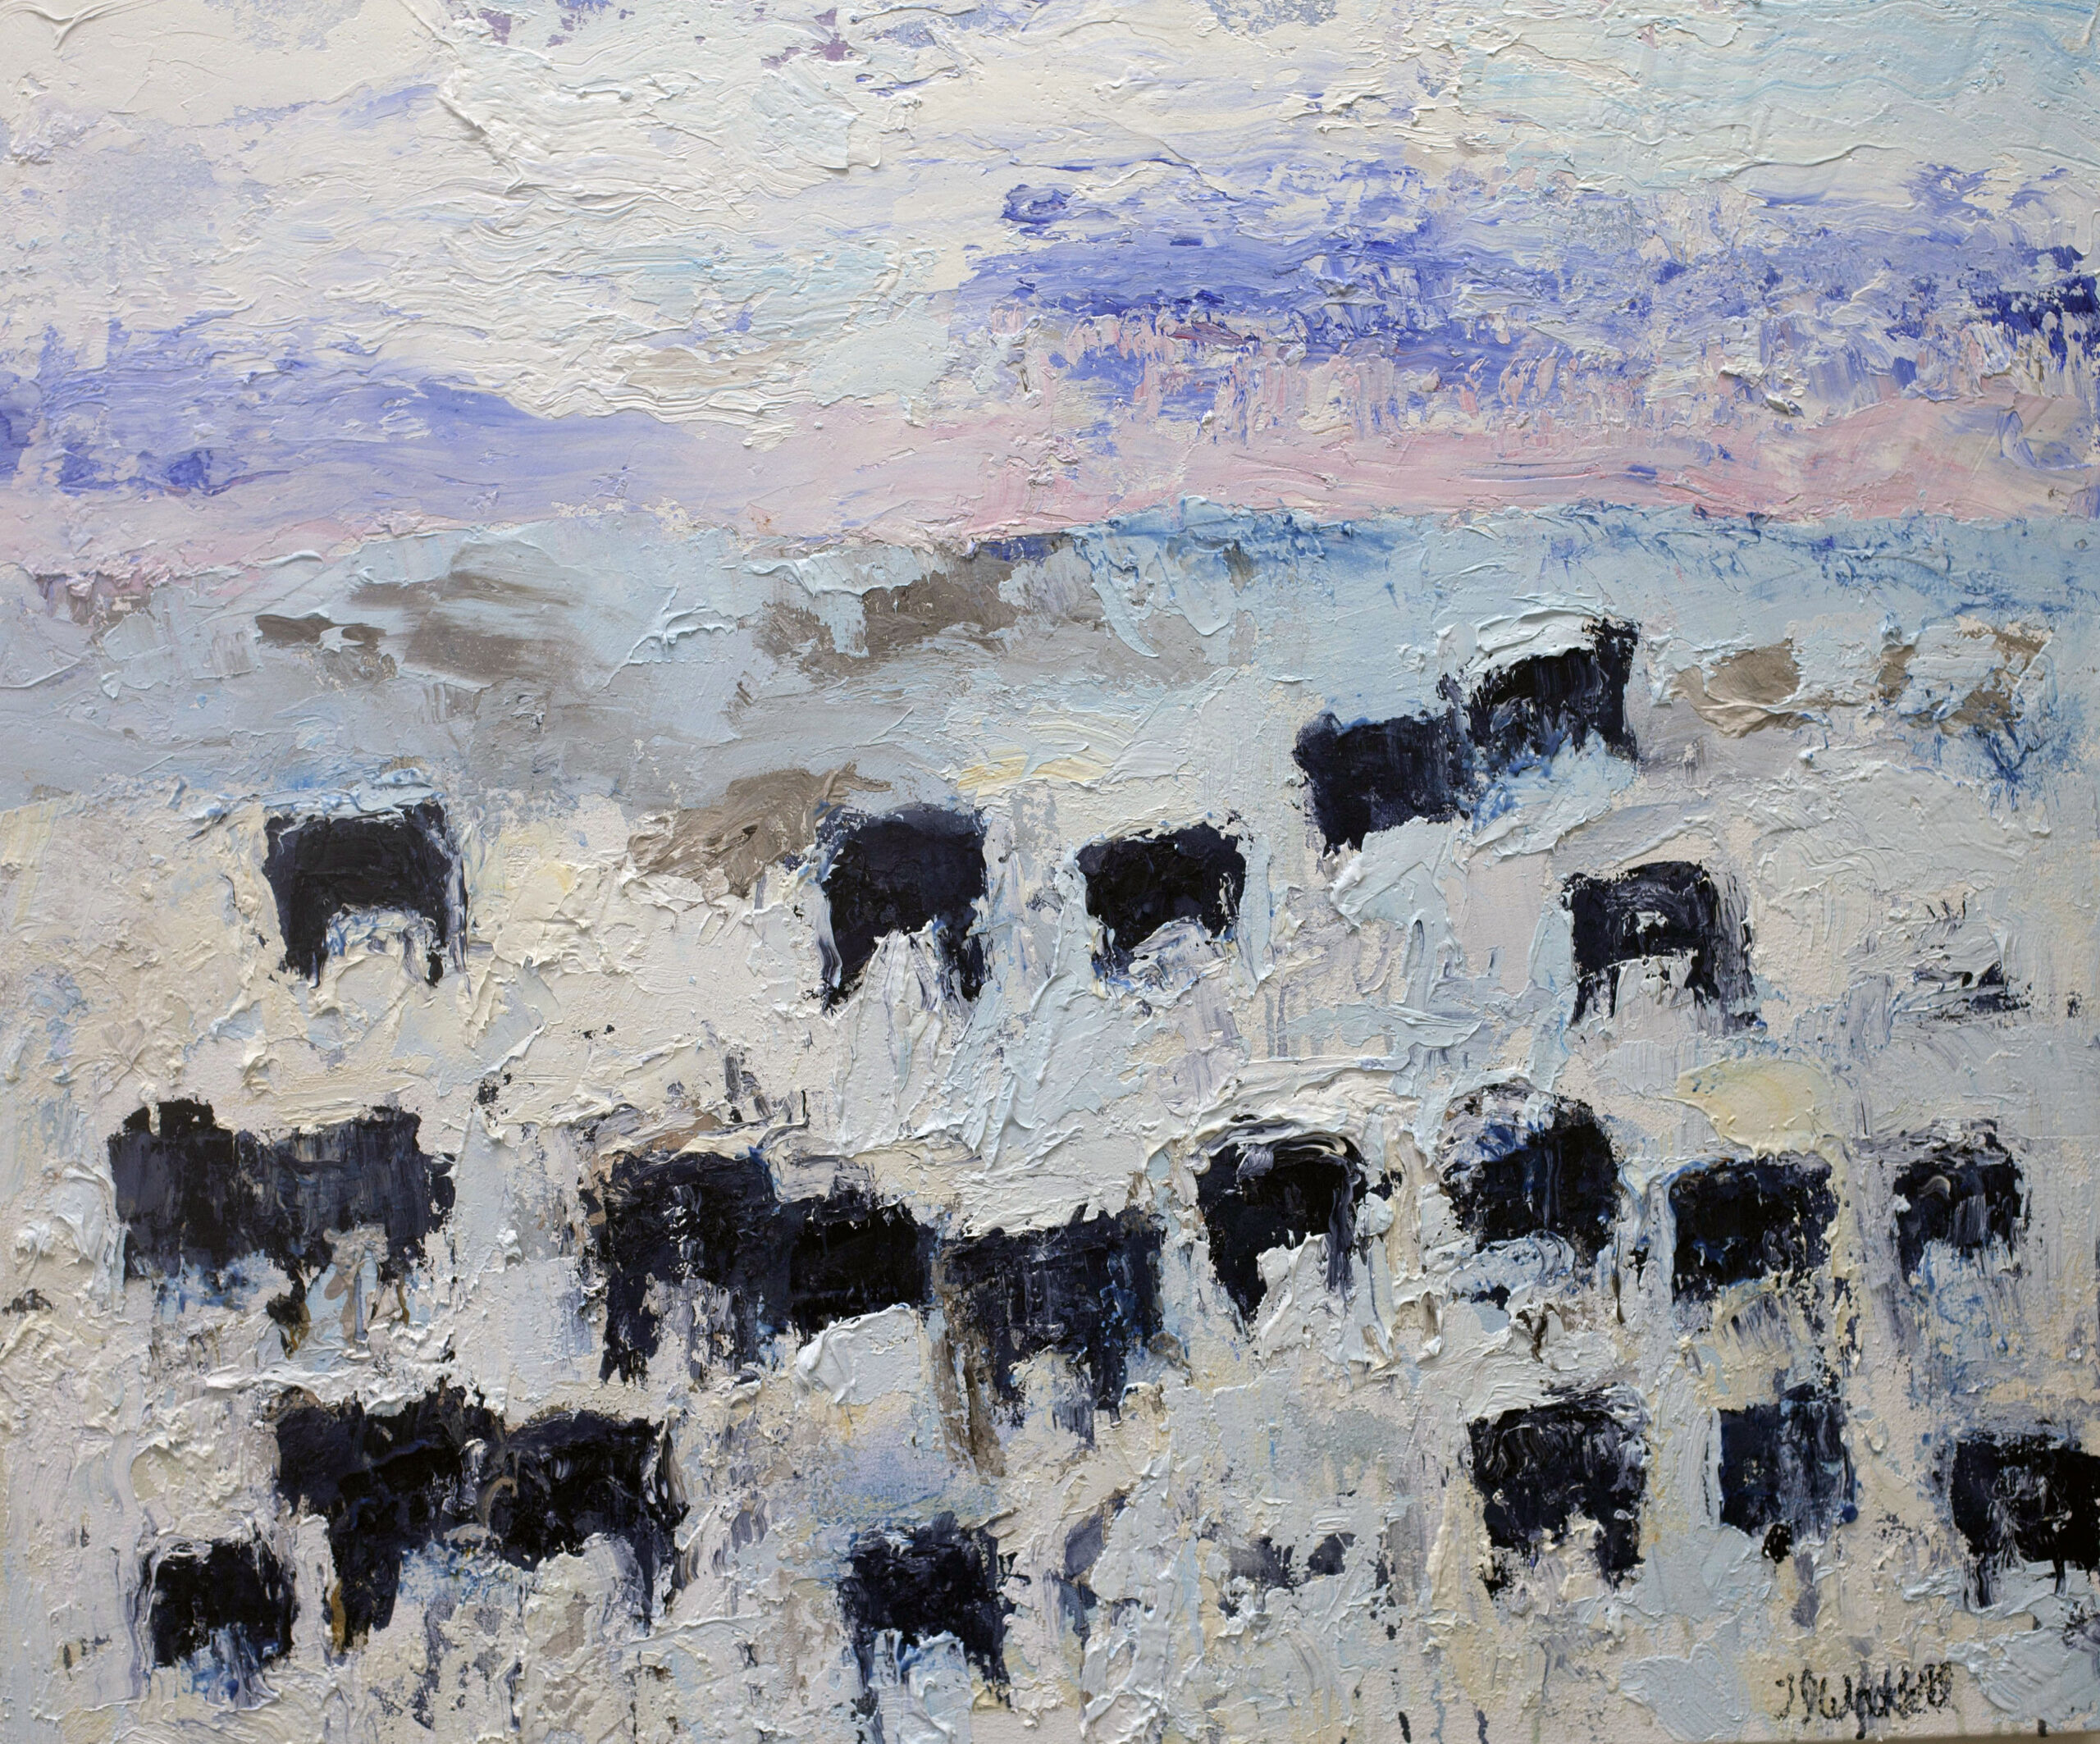 
							

									Theodore Waddell									Winter Angus #17 									oil and encaustic on canvas<br />
30 x 36 inches									


							